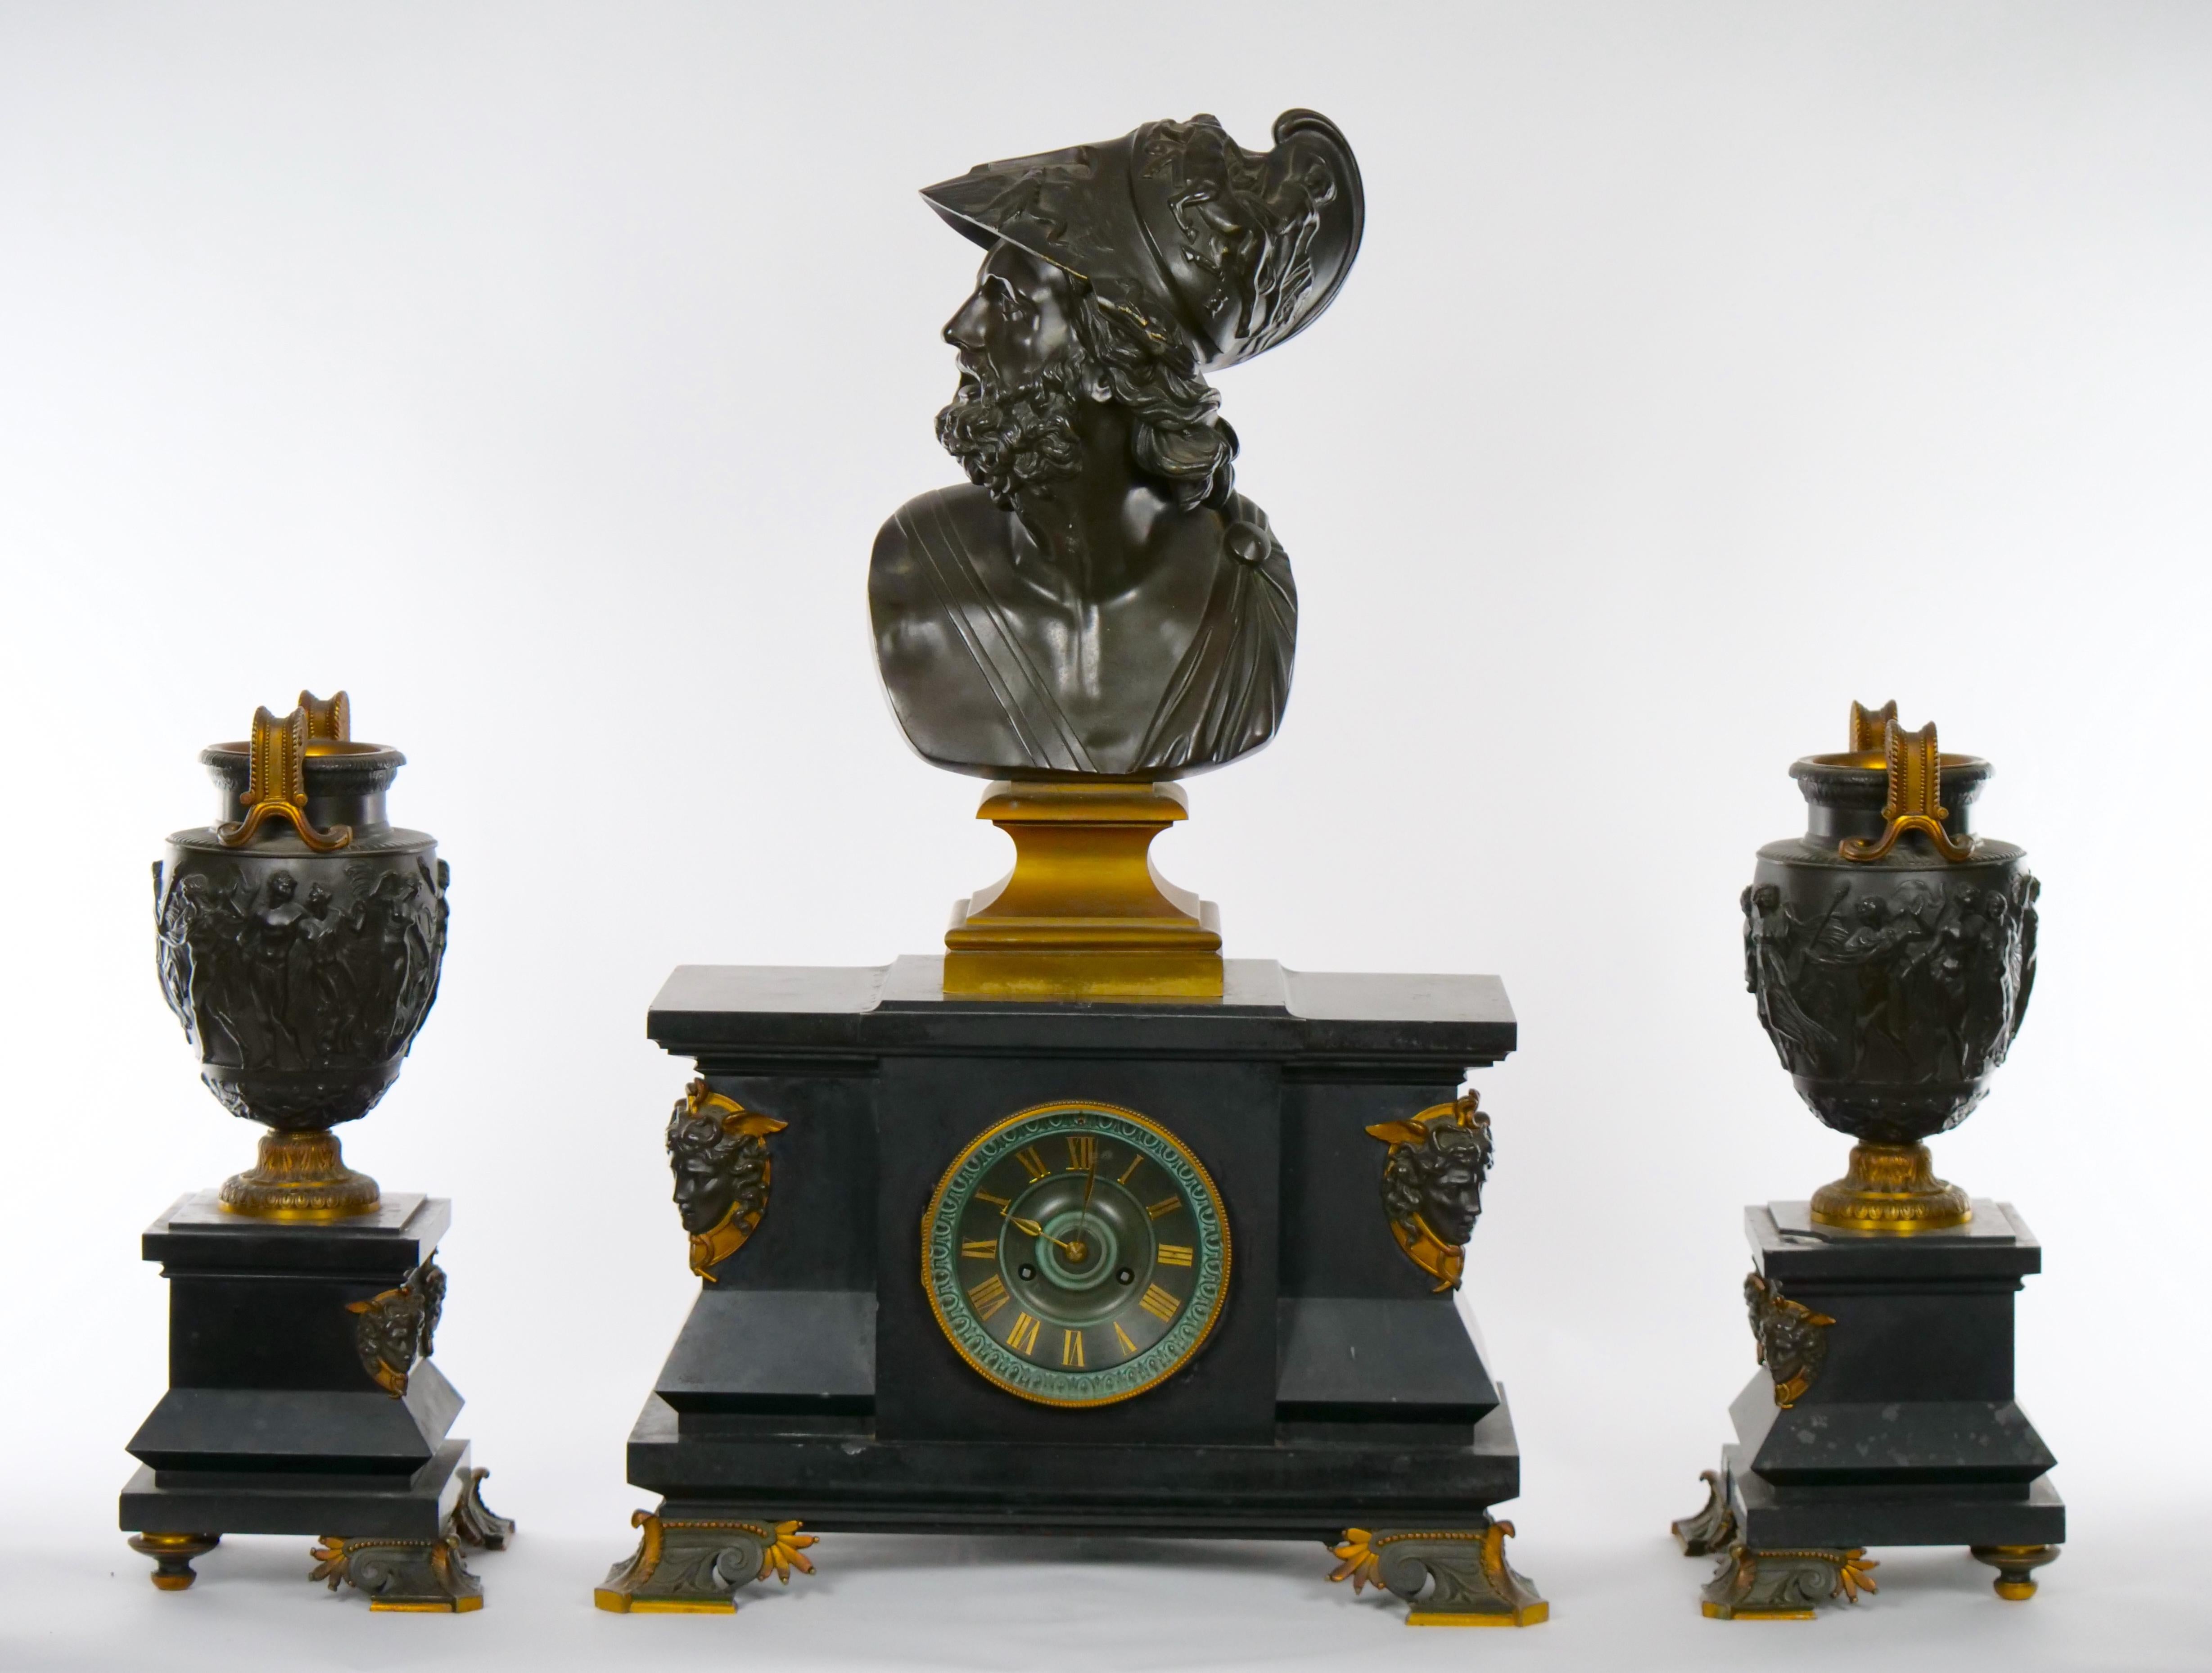 Excellent craftsmanship French gilt bronze and slate three piece clock garniture from the mid 19th century with the bust of Menelaus King of Sparta. The garniture set include one Clock that is surmounted with a removable bust of Menelaus , King of